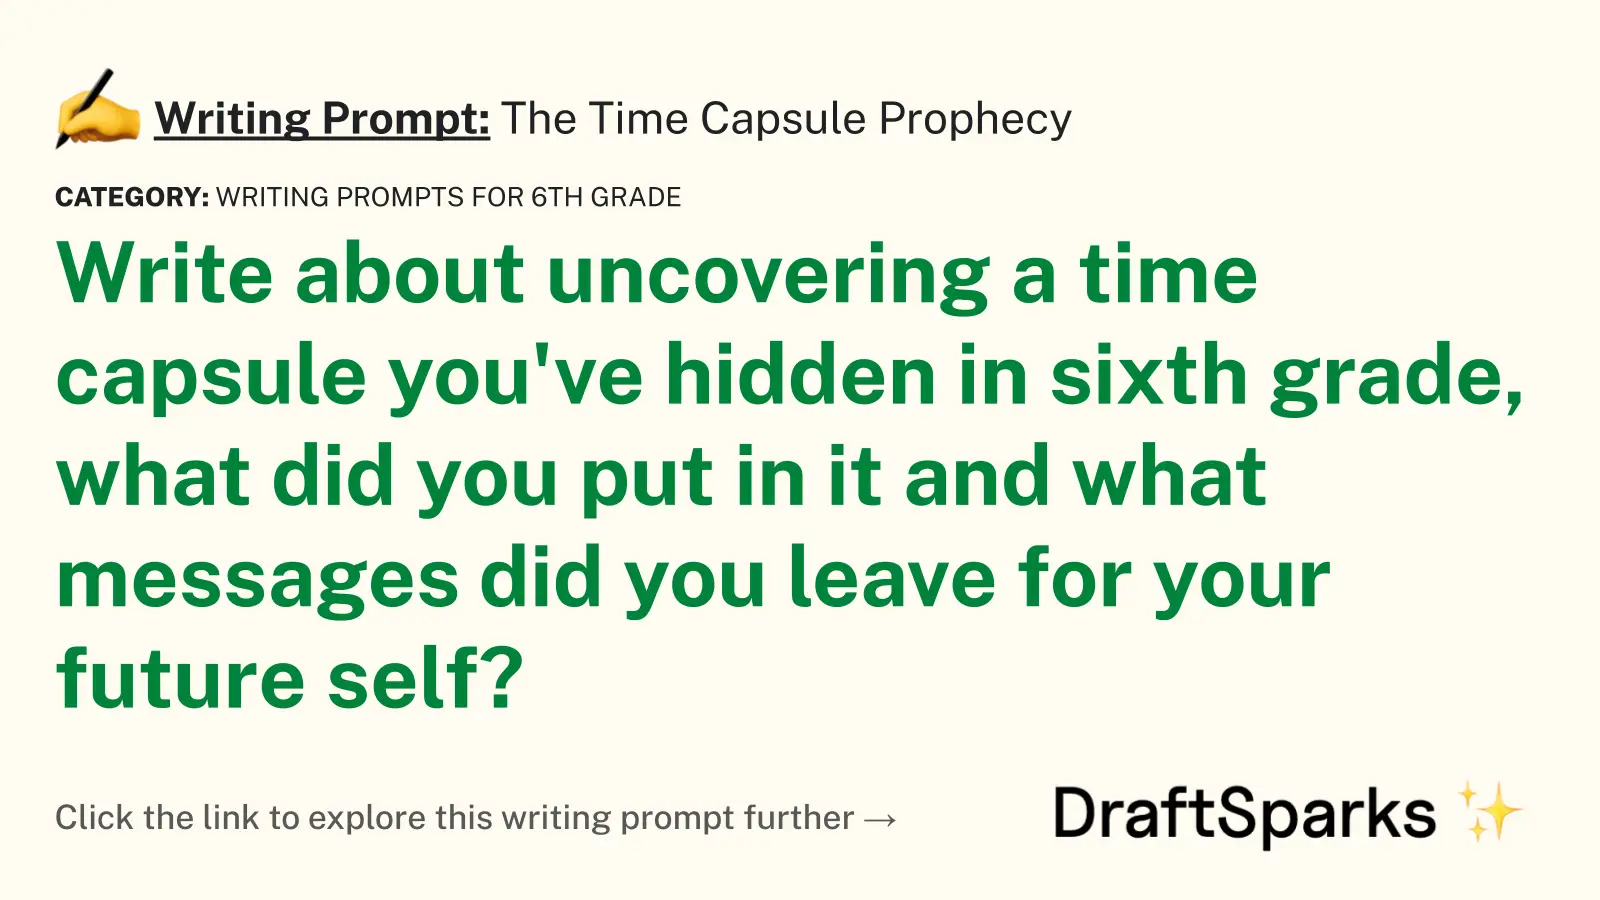 The Time Capsule Prophecy